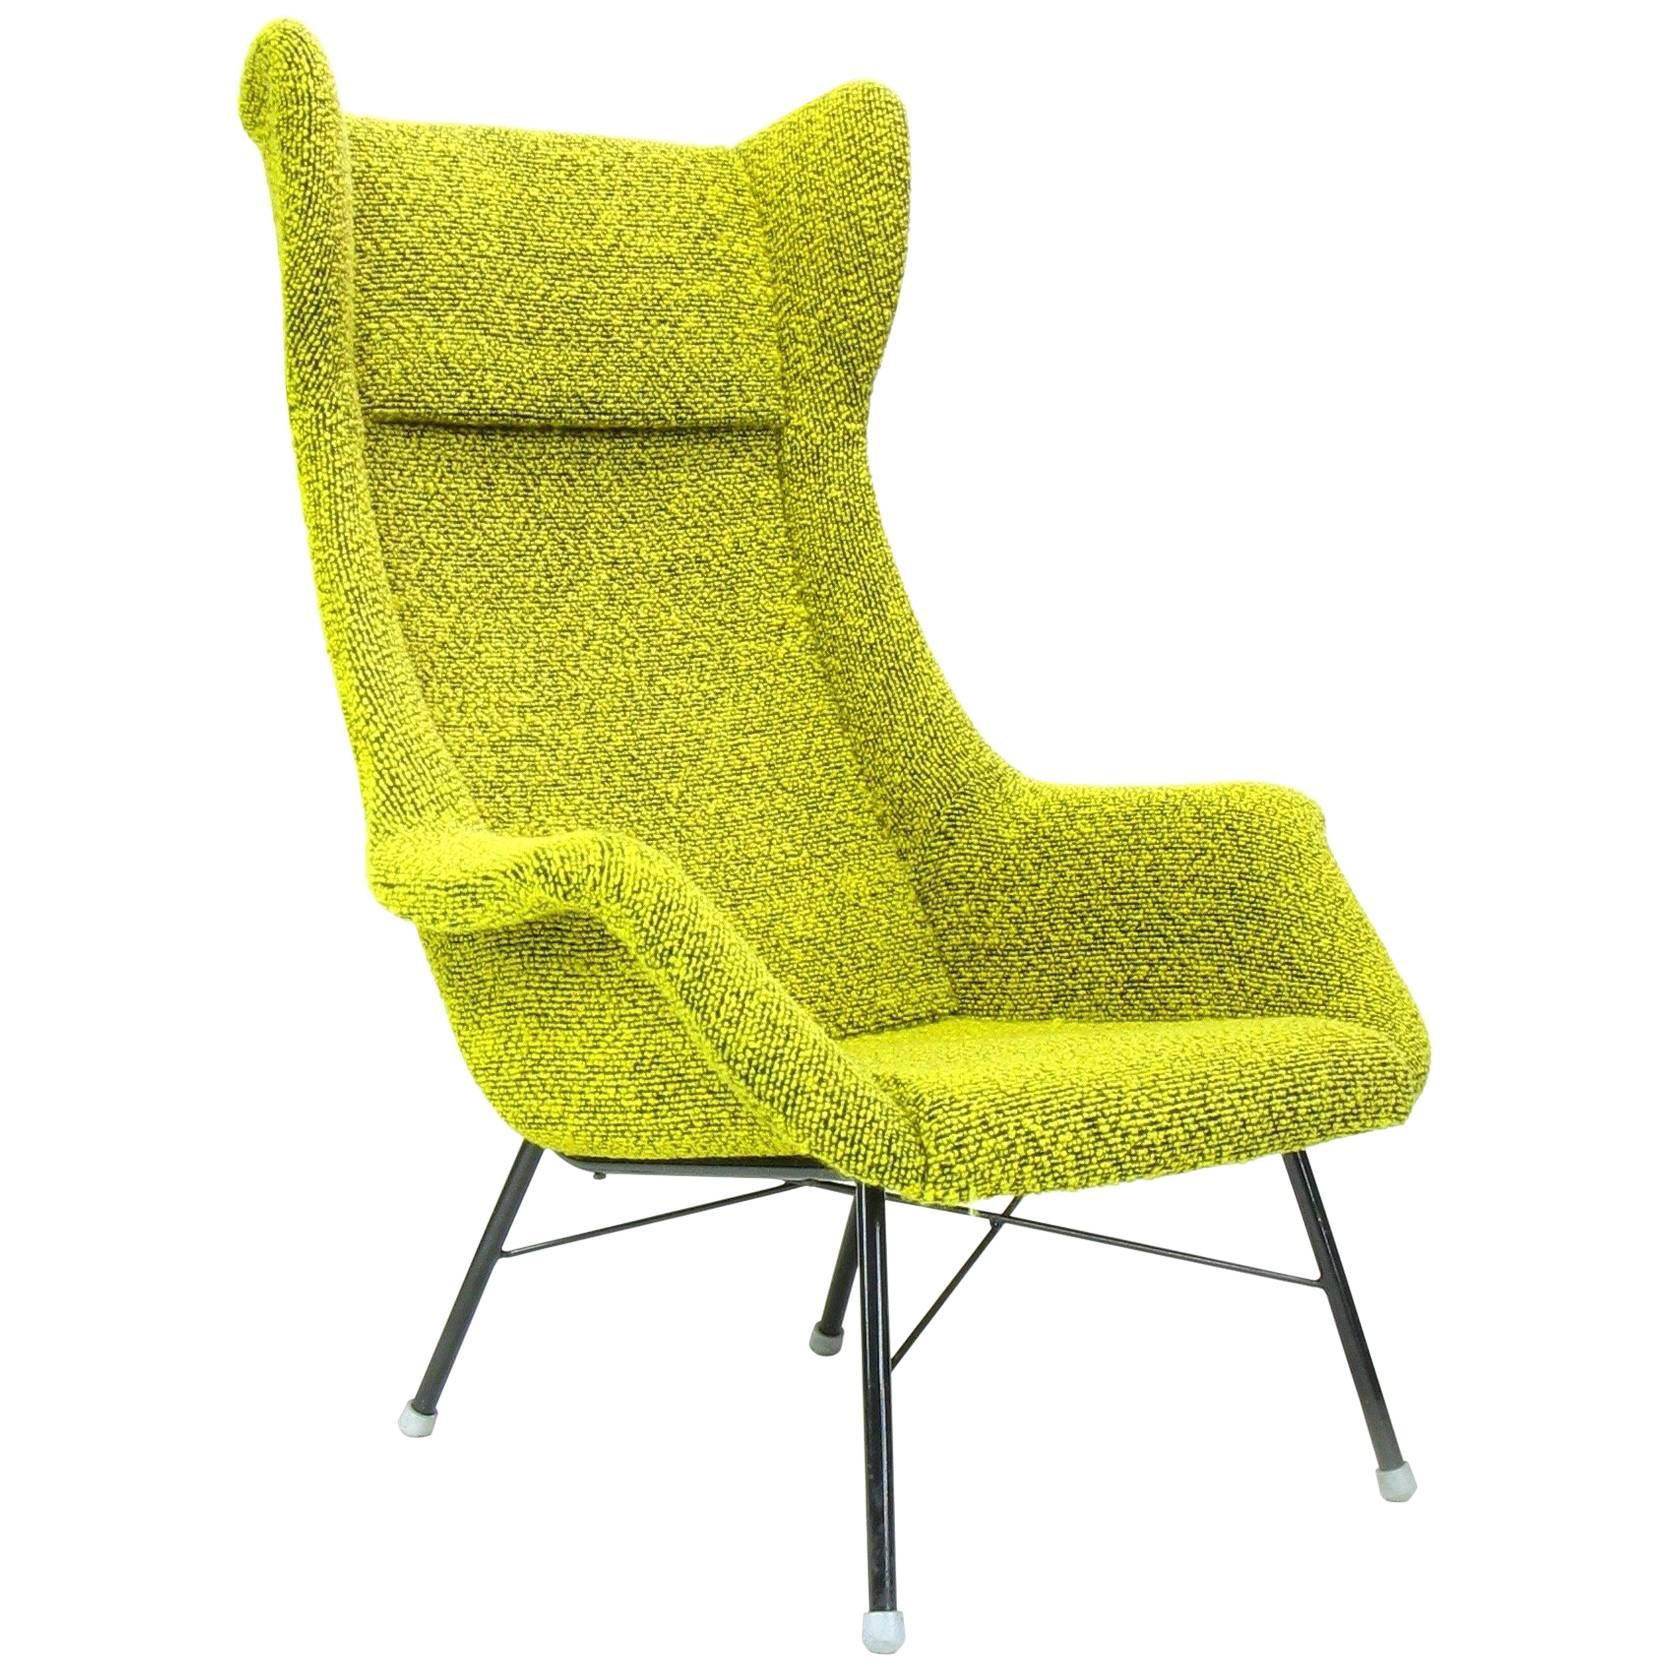 Yellow and Green Wingback Armchair by Miroslav Navratil for Ton, 1960s